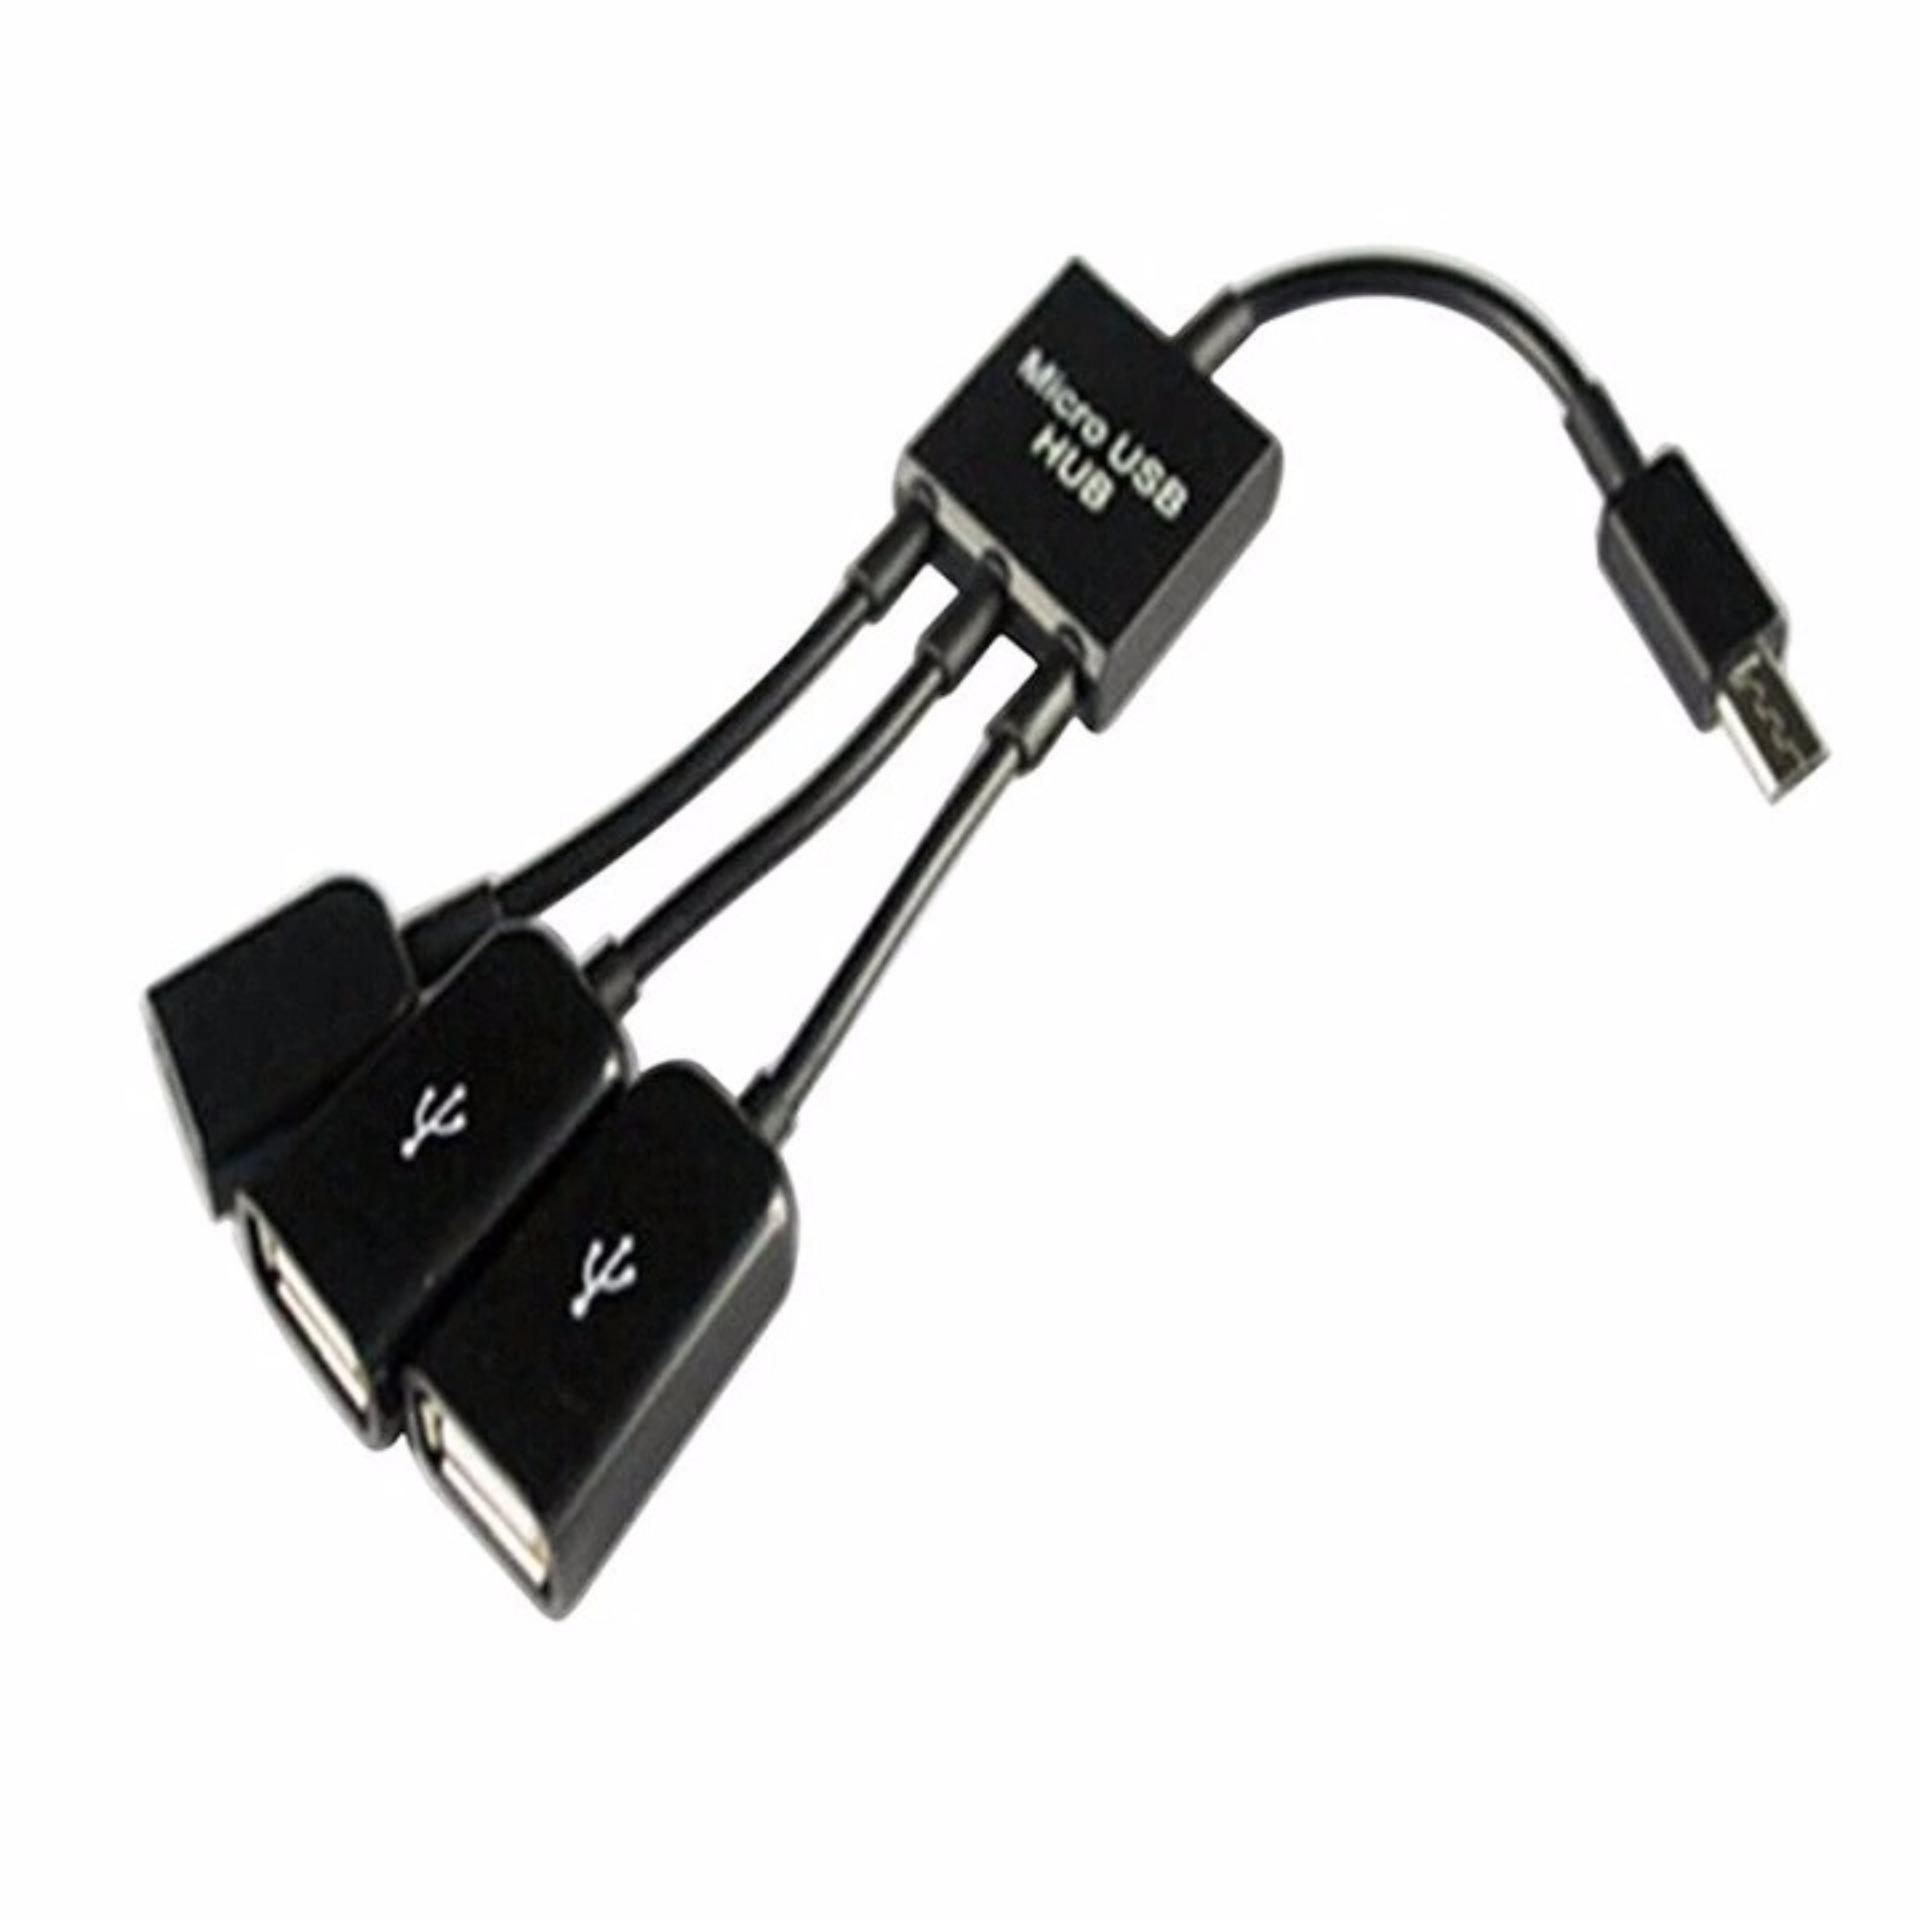 BolehDeals 3in1 Micro USB OTG Hub Host Extension Adapter Cable For Android Phone Tablet - intl